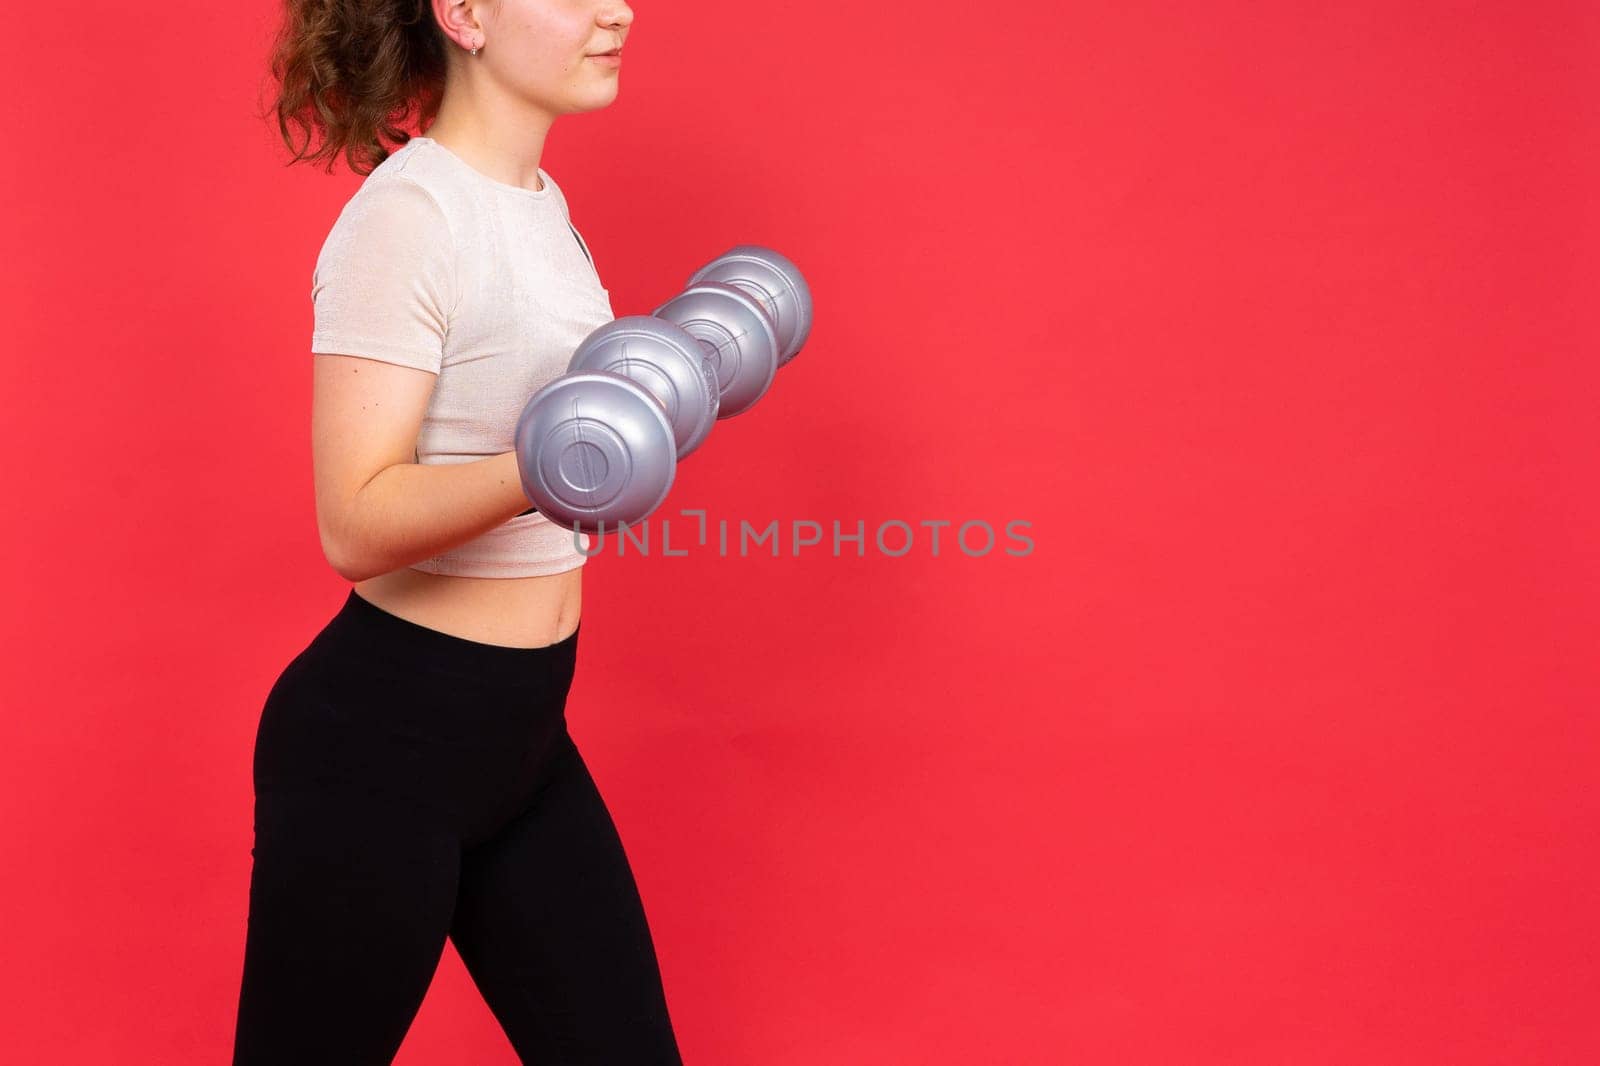 Teenage sportive girl exercises with dumbbells to develop muscles isolated on red background. by Zelenin